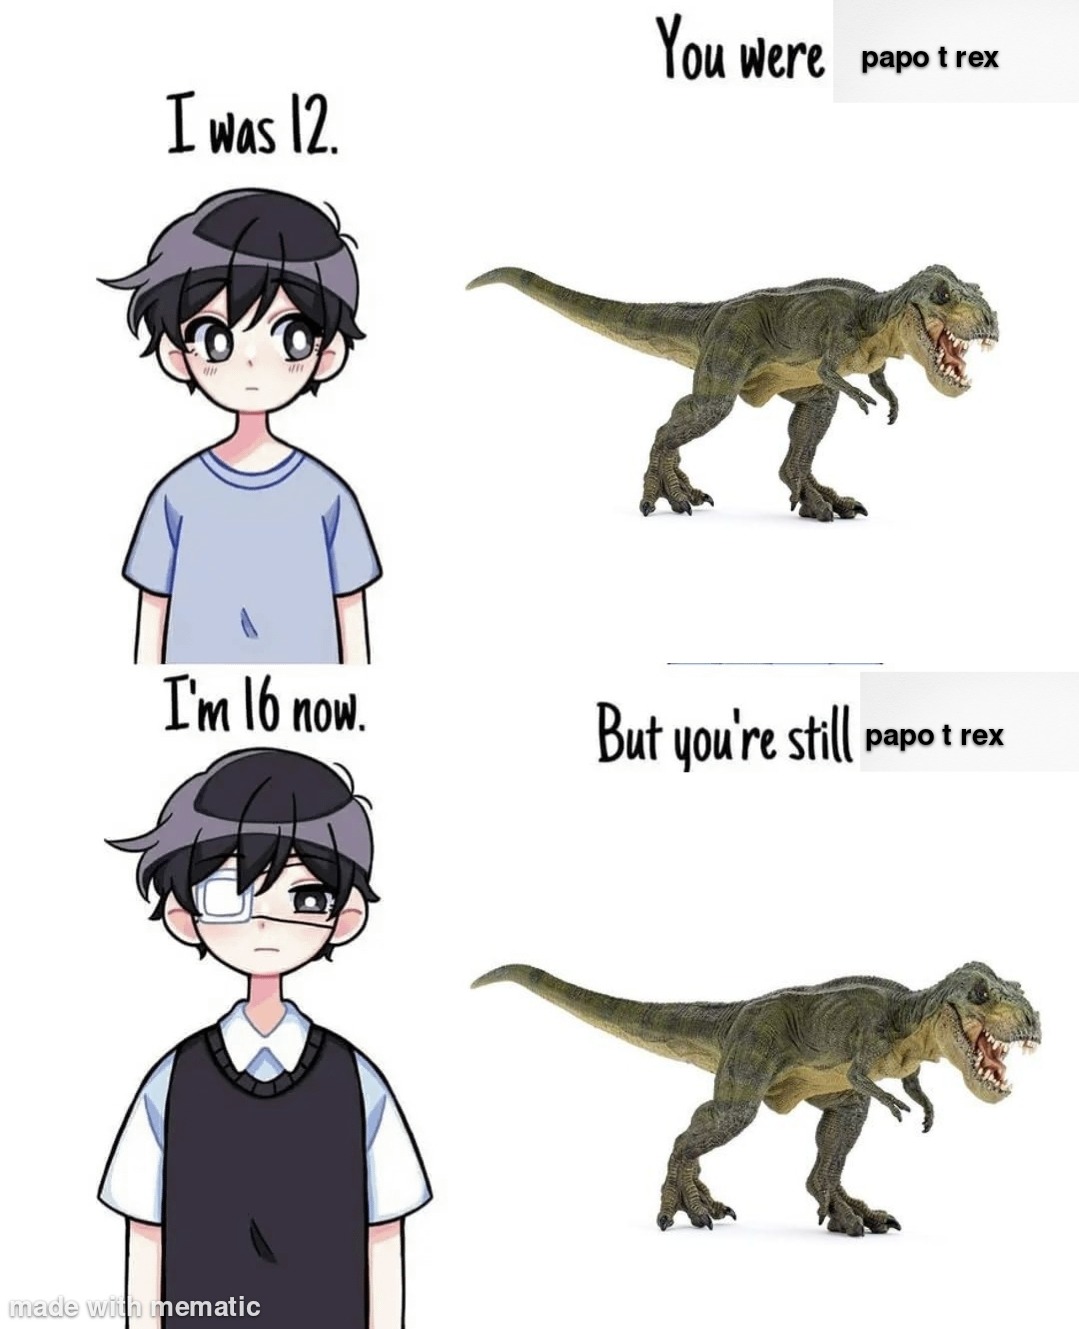 I keep seeing this t rex everywhere so i decided to shitpost about it - meme